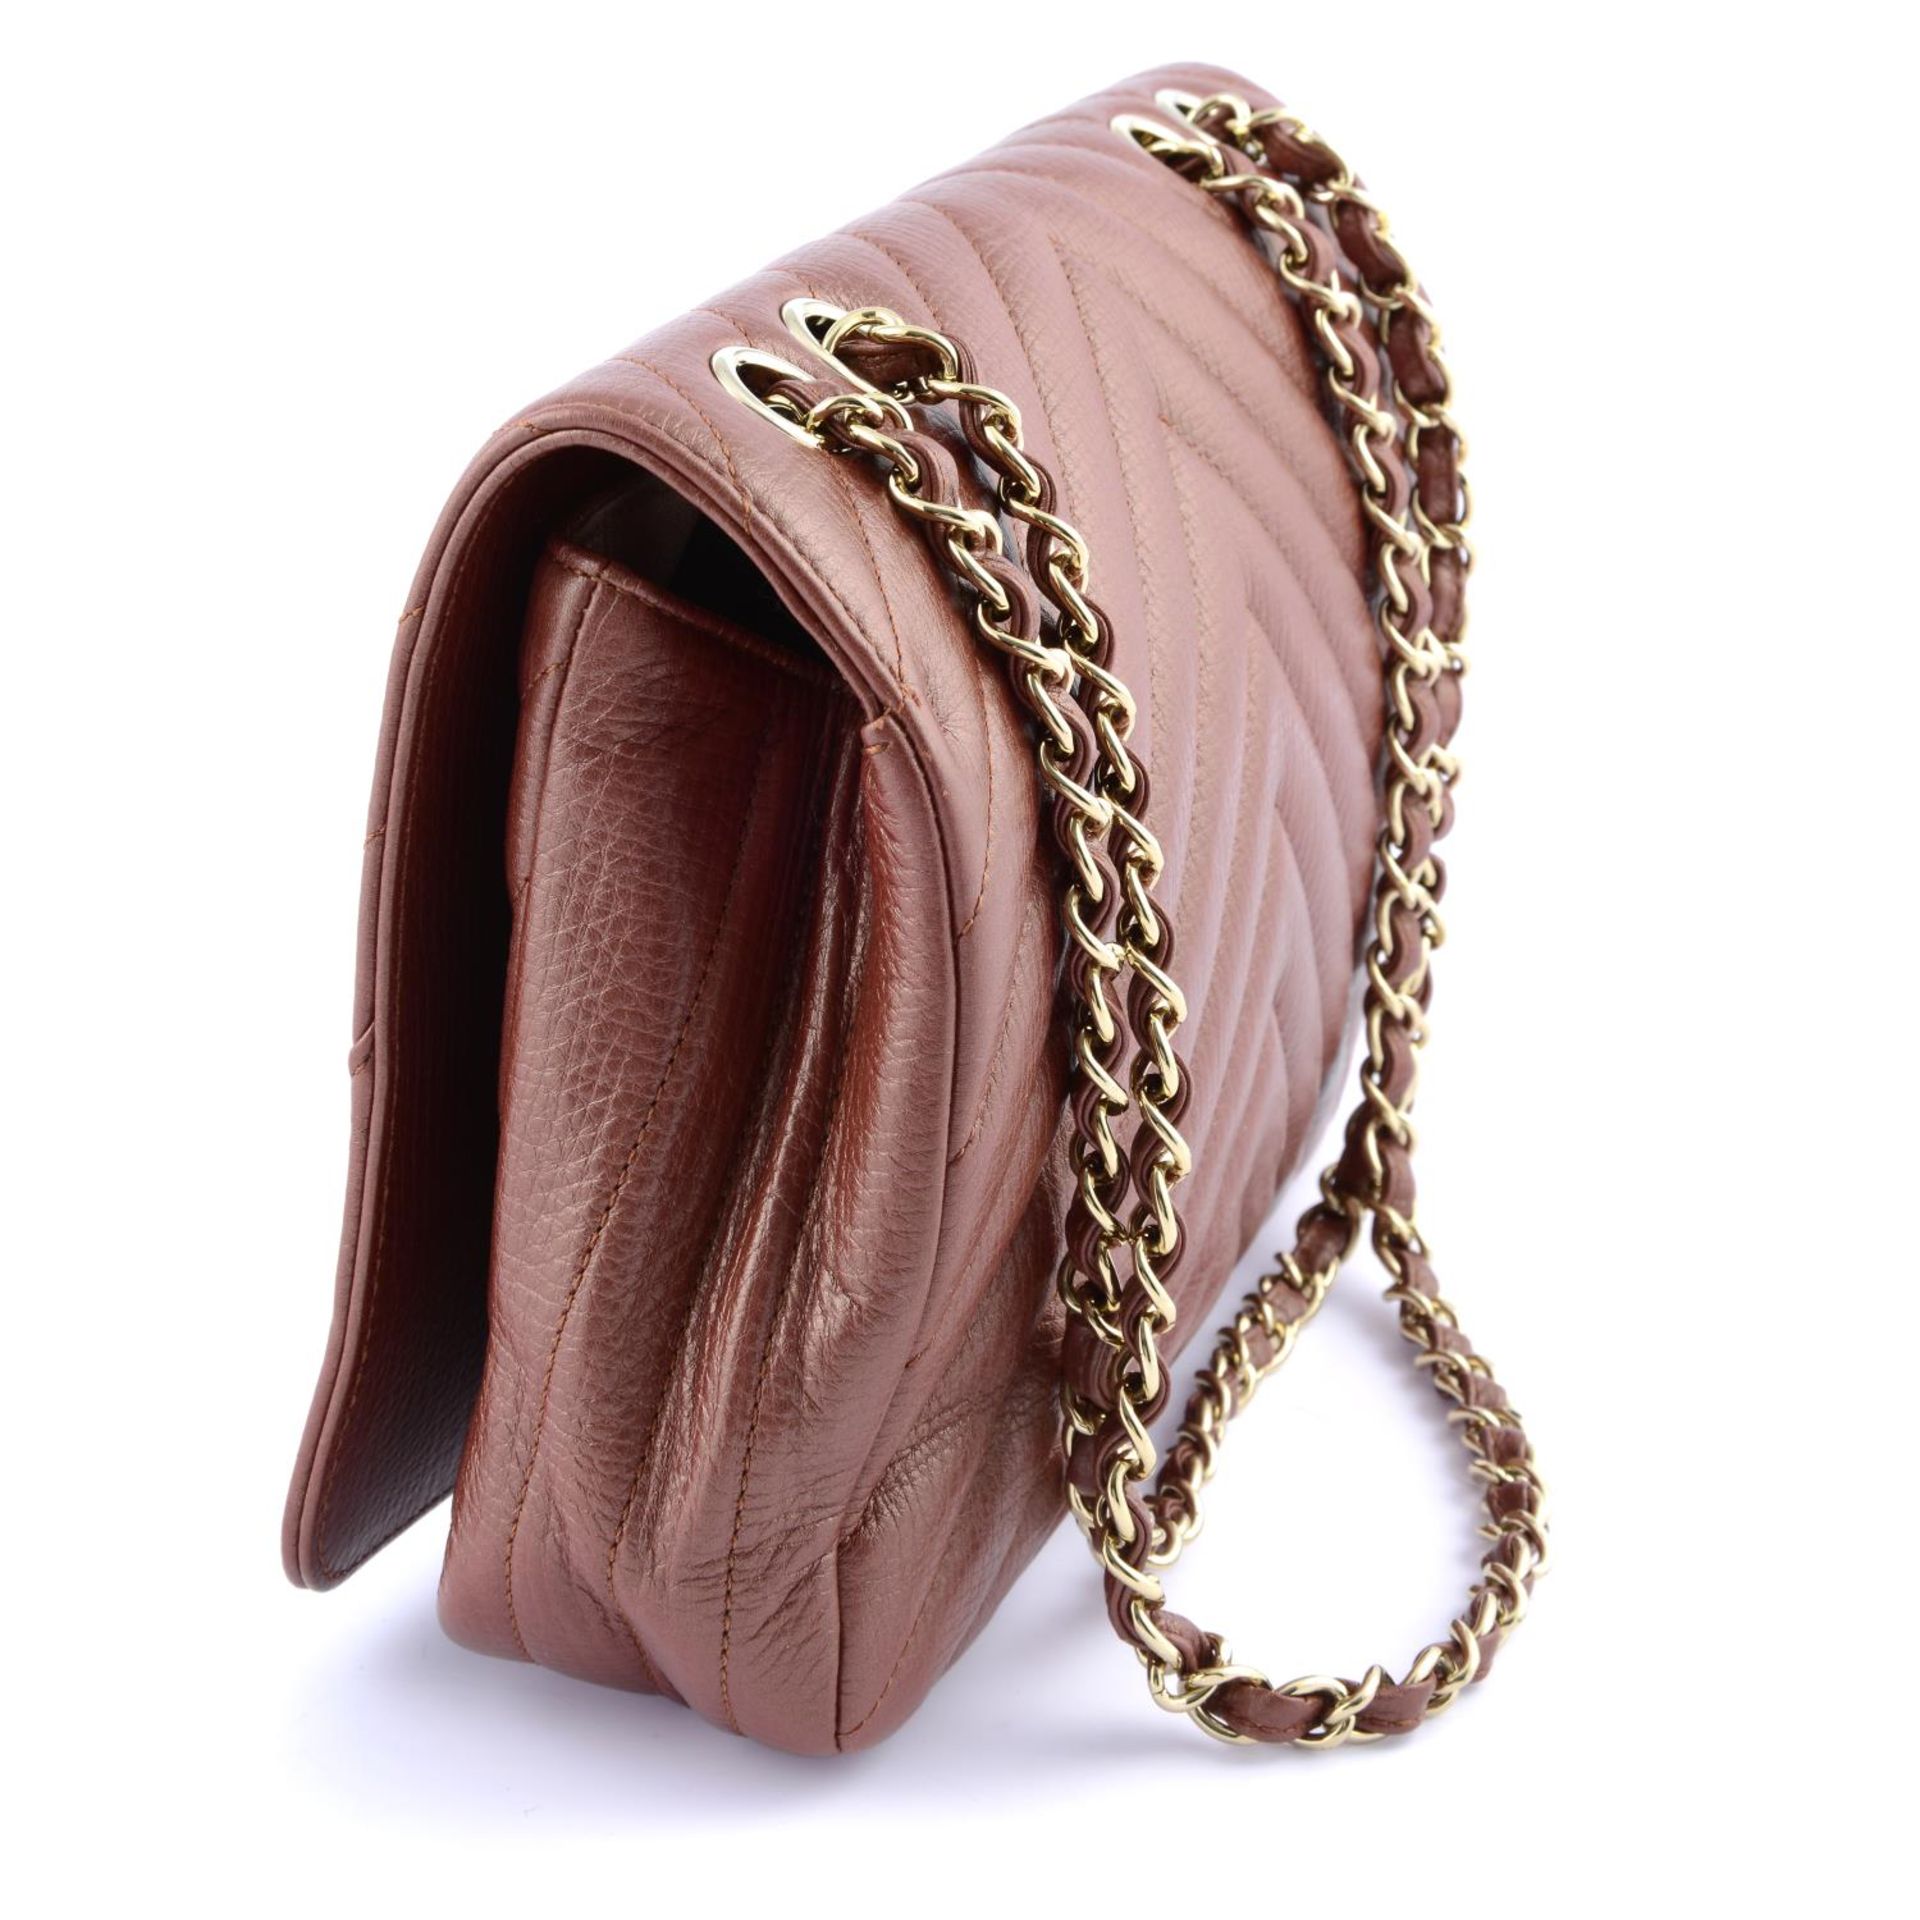 CHANEL - a Chevron Quilted Flap handbag. - Image 3 of 4